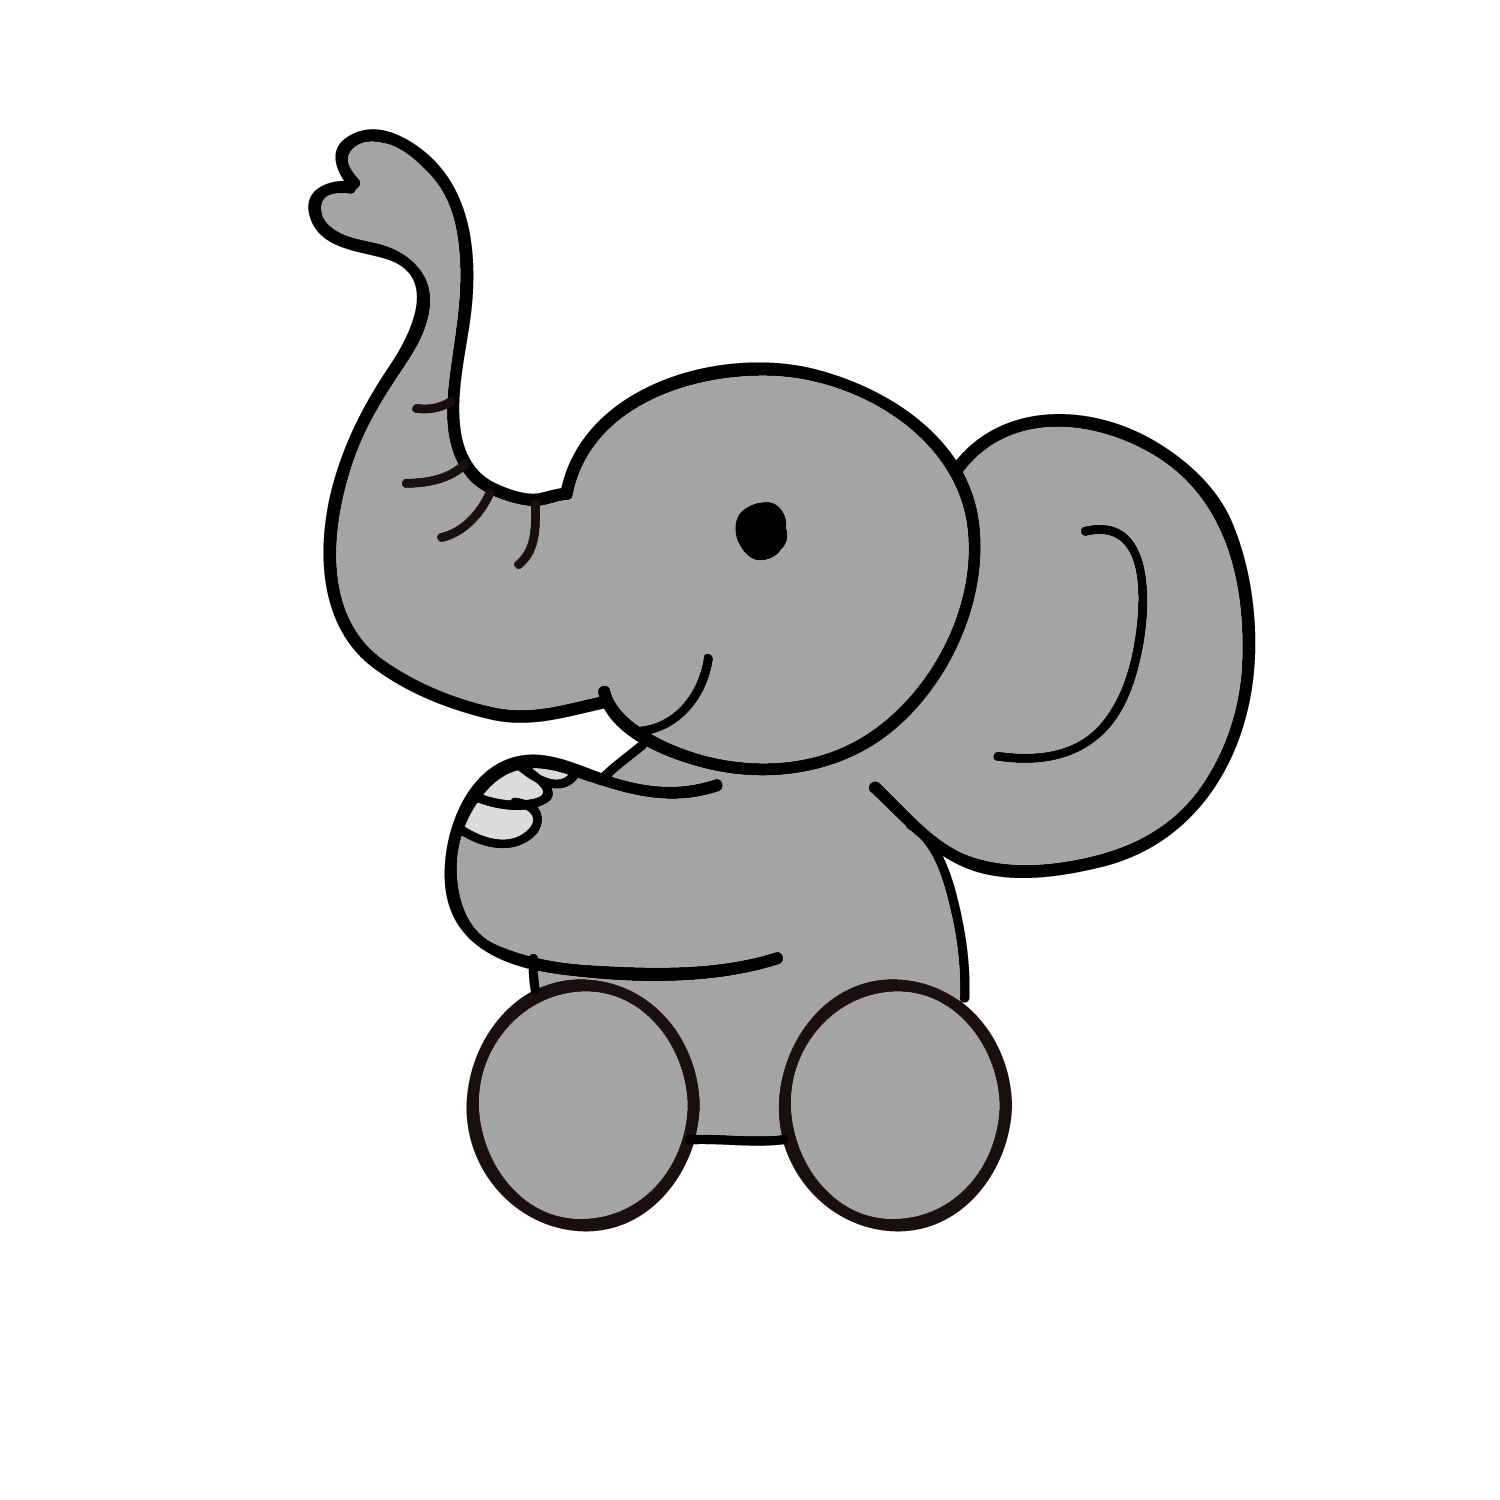 Cartoon Images Of Elephants - Clipart library